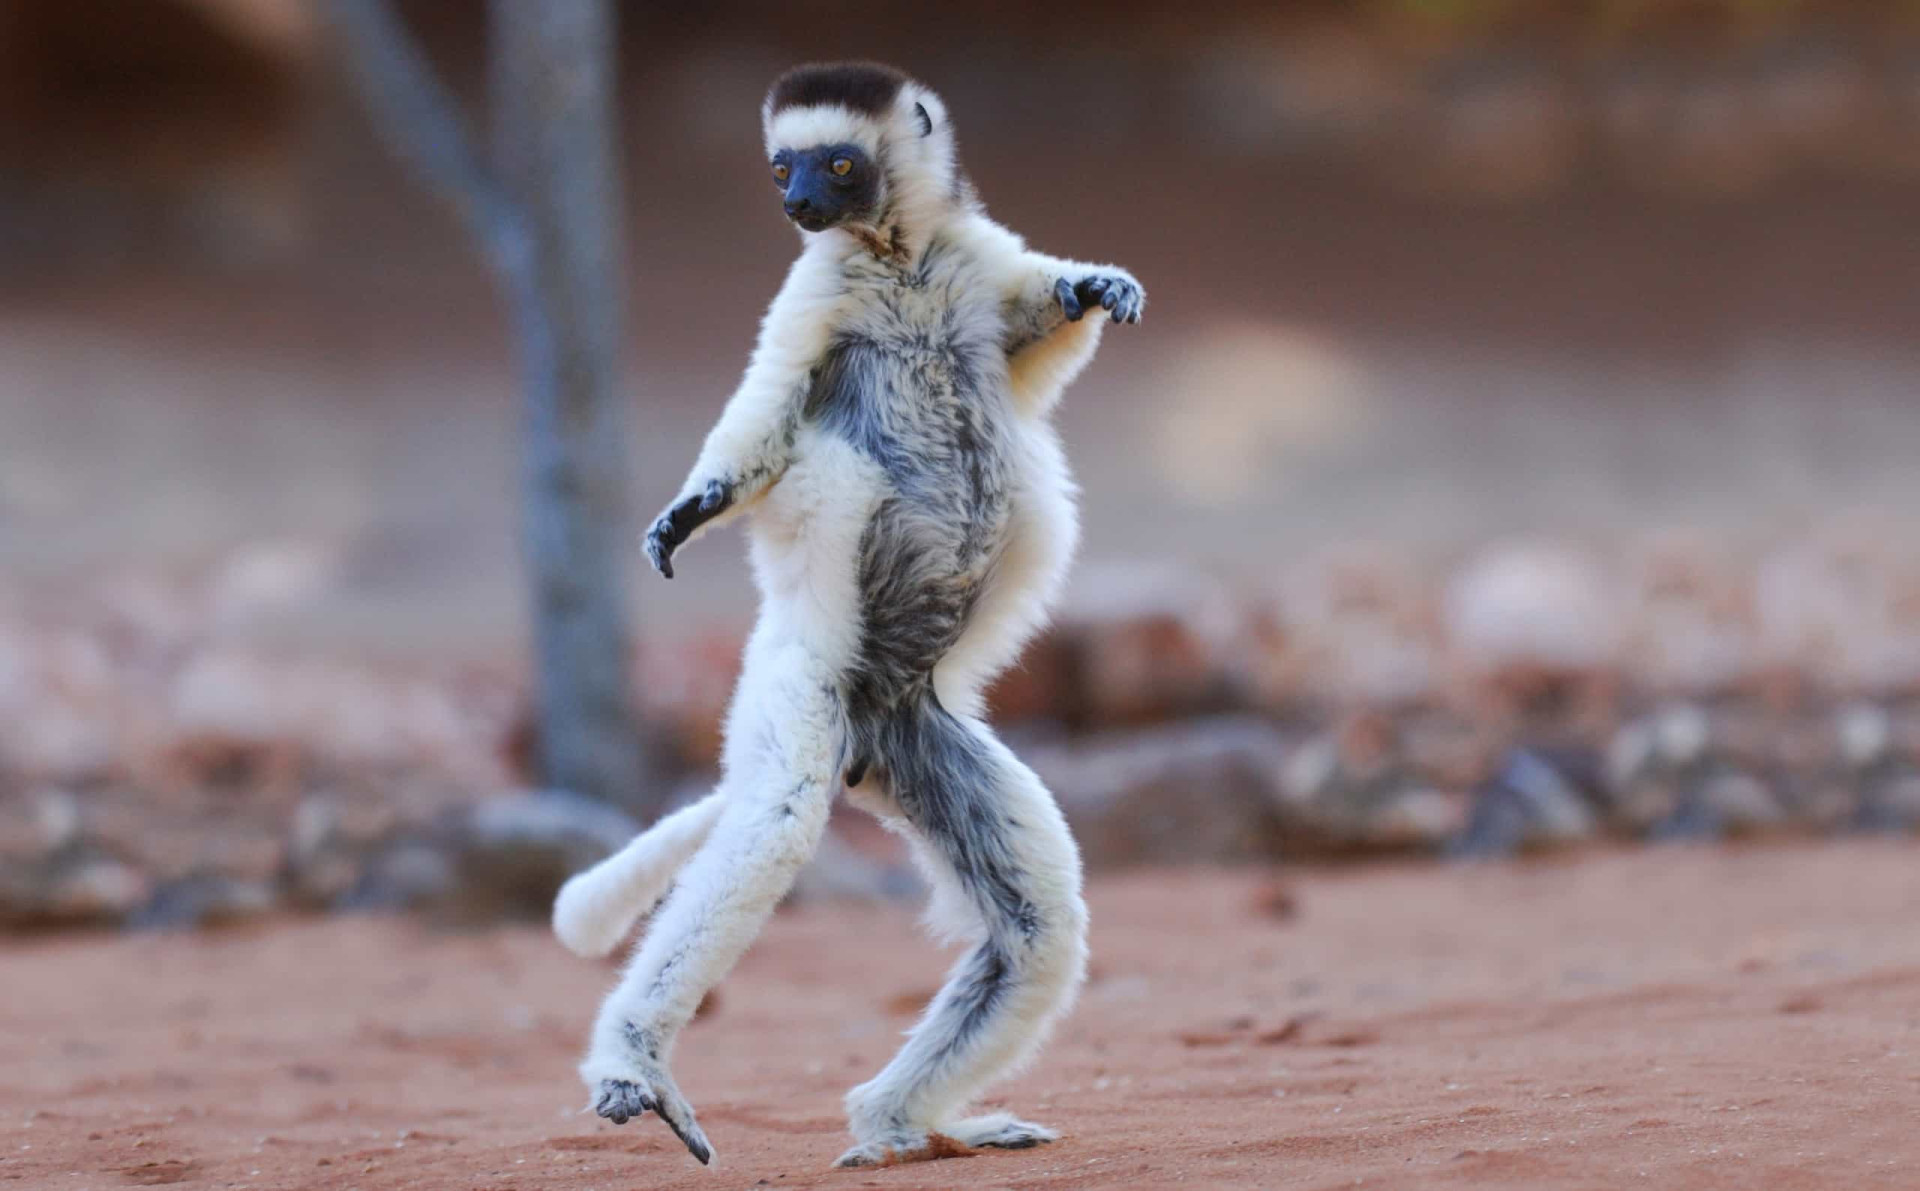 <p>The leaping form of a sifaka. Like all lemurs, sifakas are only found in Madagascar.</p><p><a href="https://www.msn.com/en-us/community/channel/vid-7xx8mnucu55yw63we9va2gwr7uihbxwc68fxqp25x6tg4ftibpra?cvid=94631541bc0f4f89bfd59158d696ad7e">Follow us and access great exclusive content every day</a></p>